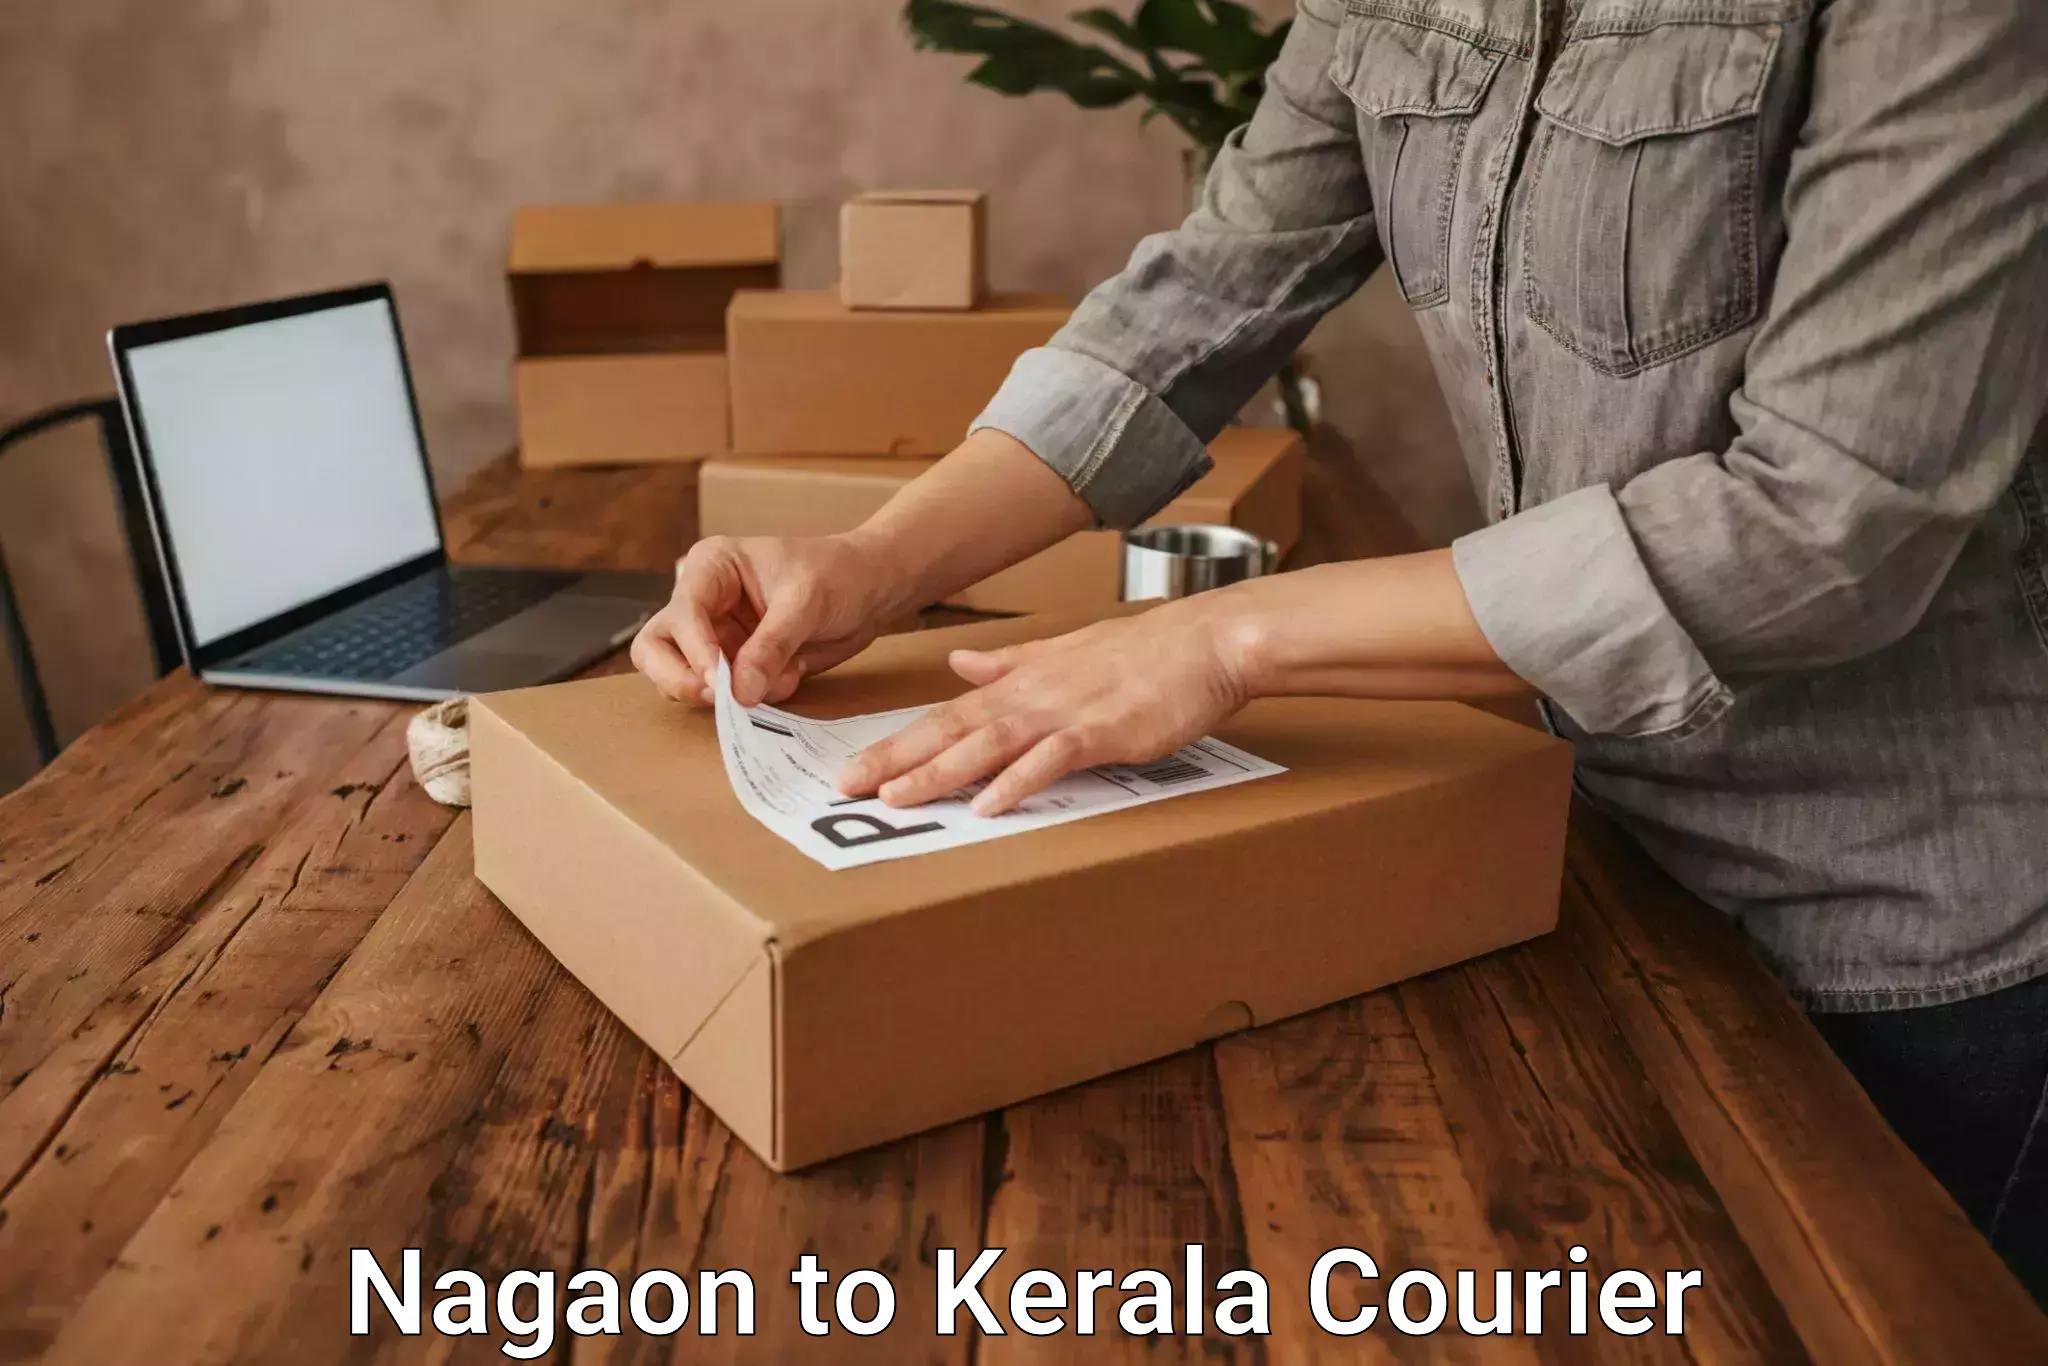 Smart shipping technology Nagaon to Cochin University of Science and Technology